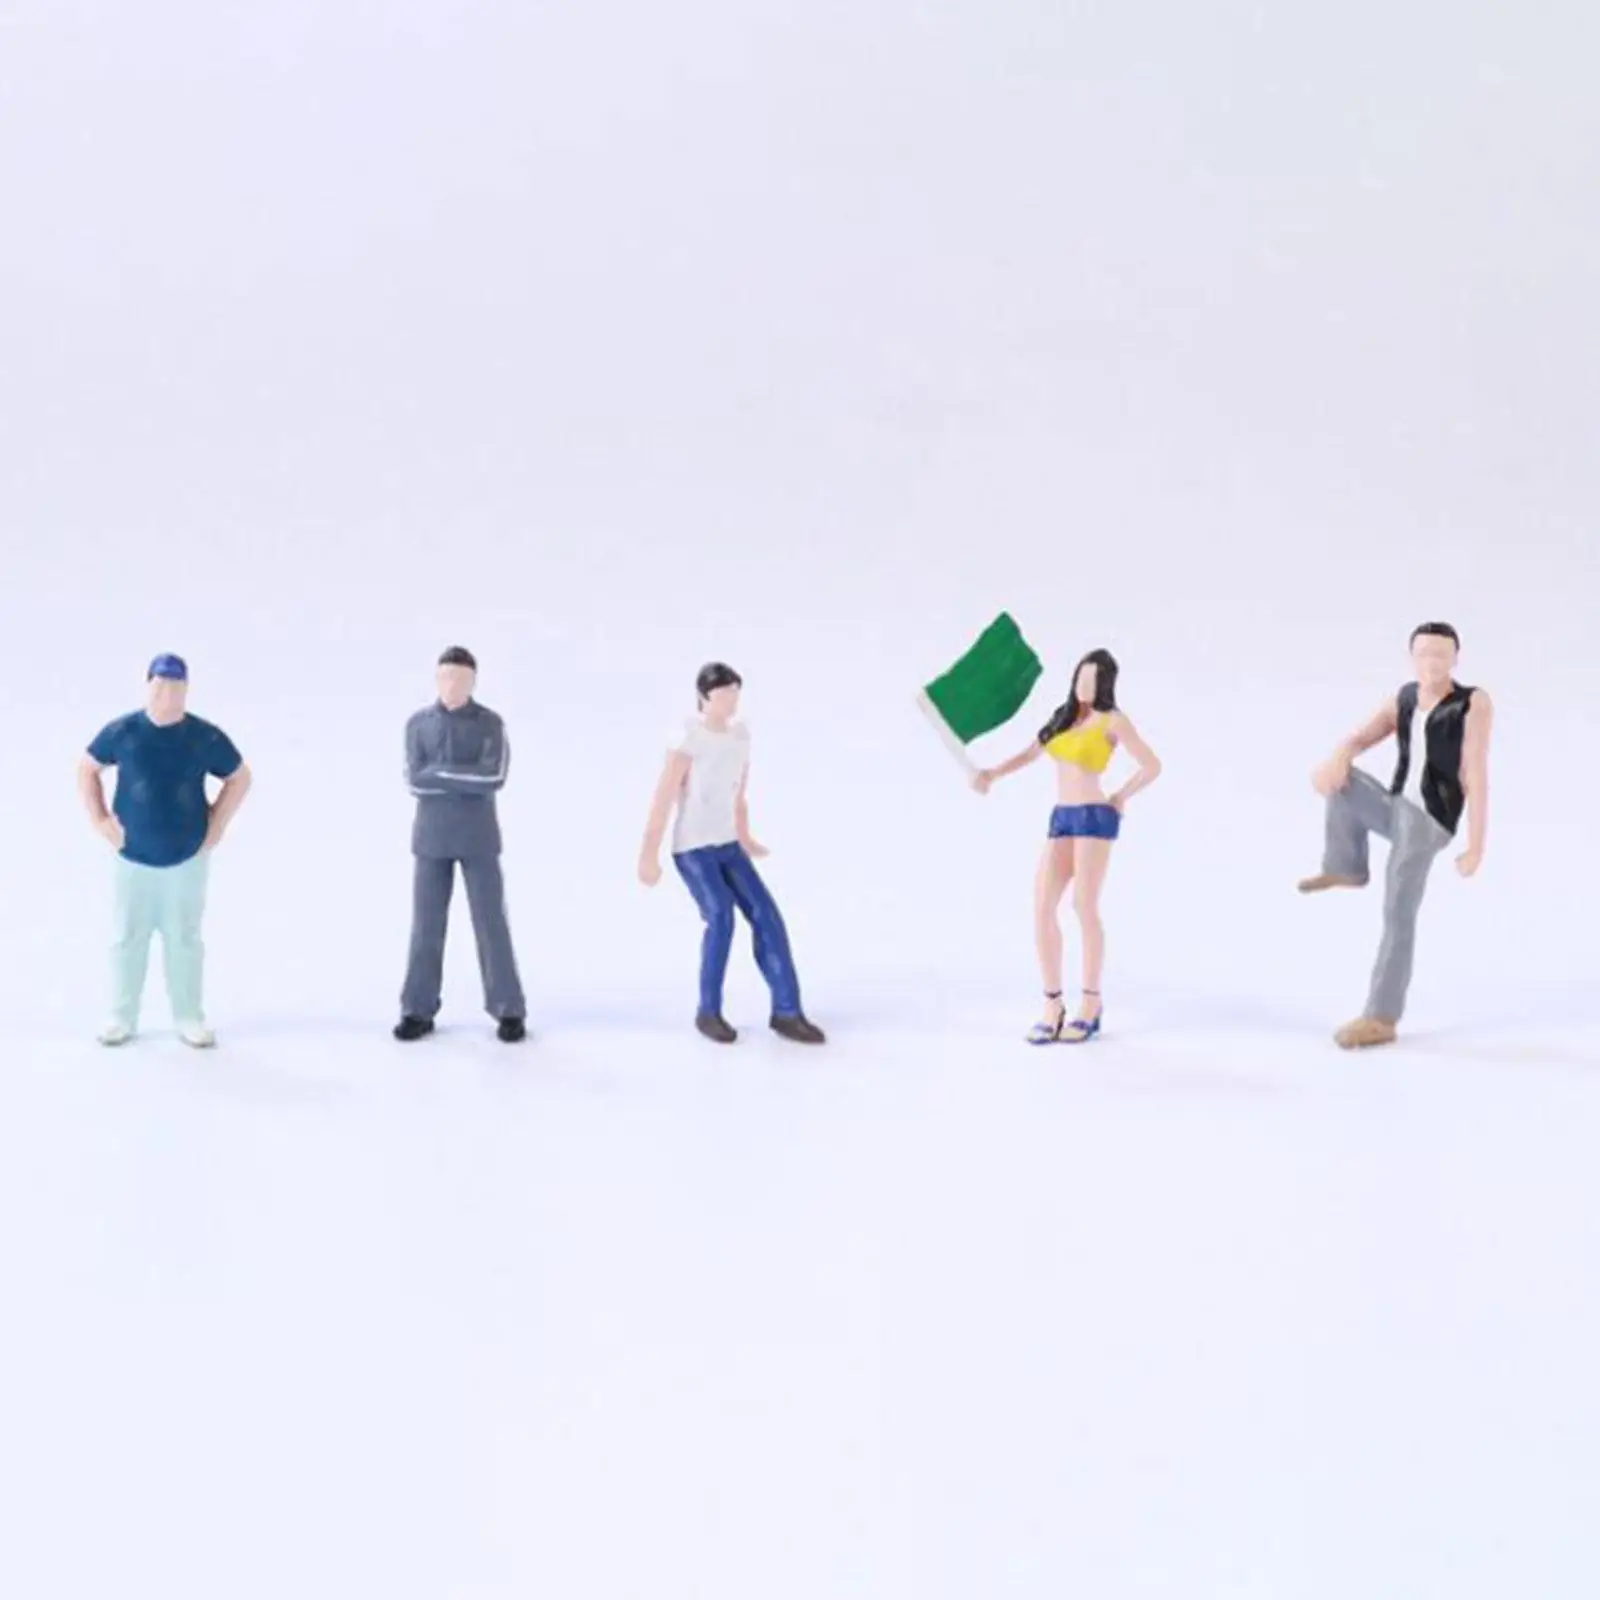 5 Pieces 1/64 Scale People Figure Set Tiny People for DIY Scenery Sand Table